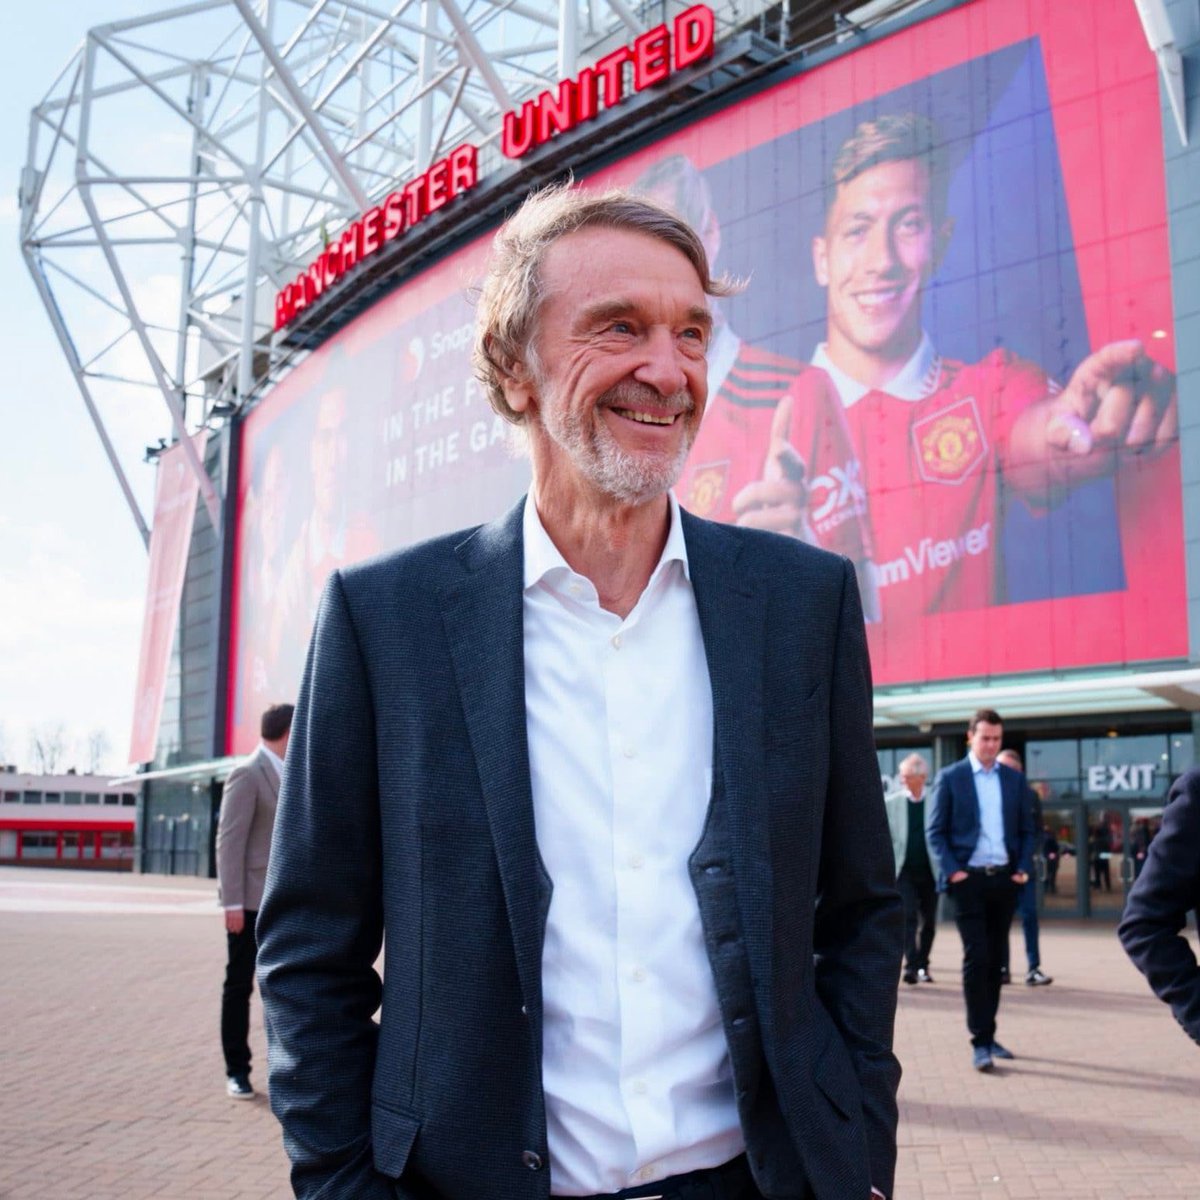 🚨 Sir Jim Ratcliffe’s message to Man Utd fans.

“Our shared ambition is clear: we all want to see Manchester United back where we belong, at the very top of English, European and world football”.

“As a local boy and a lifelong supporter of the Club, I am very pleased that we